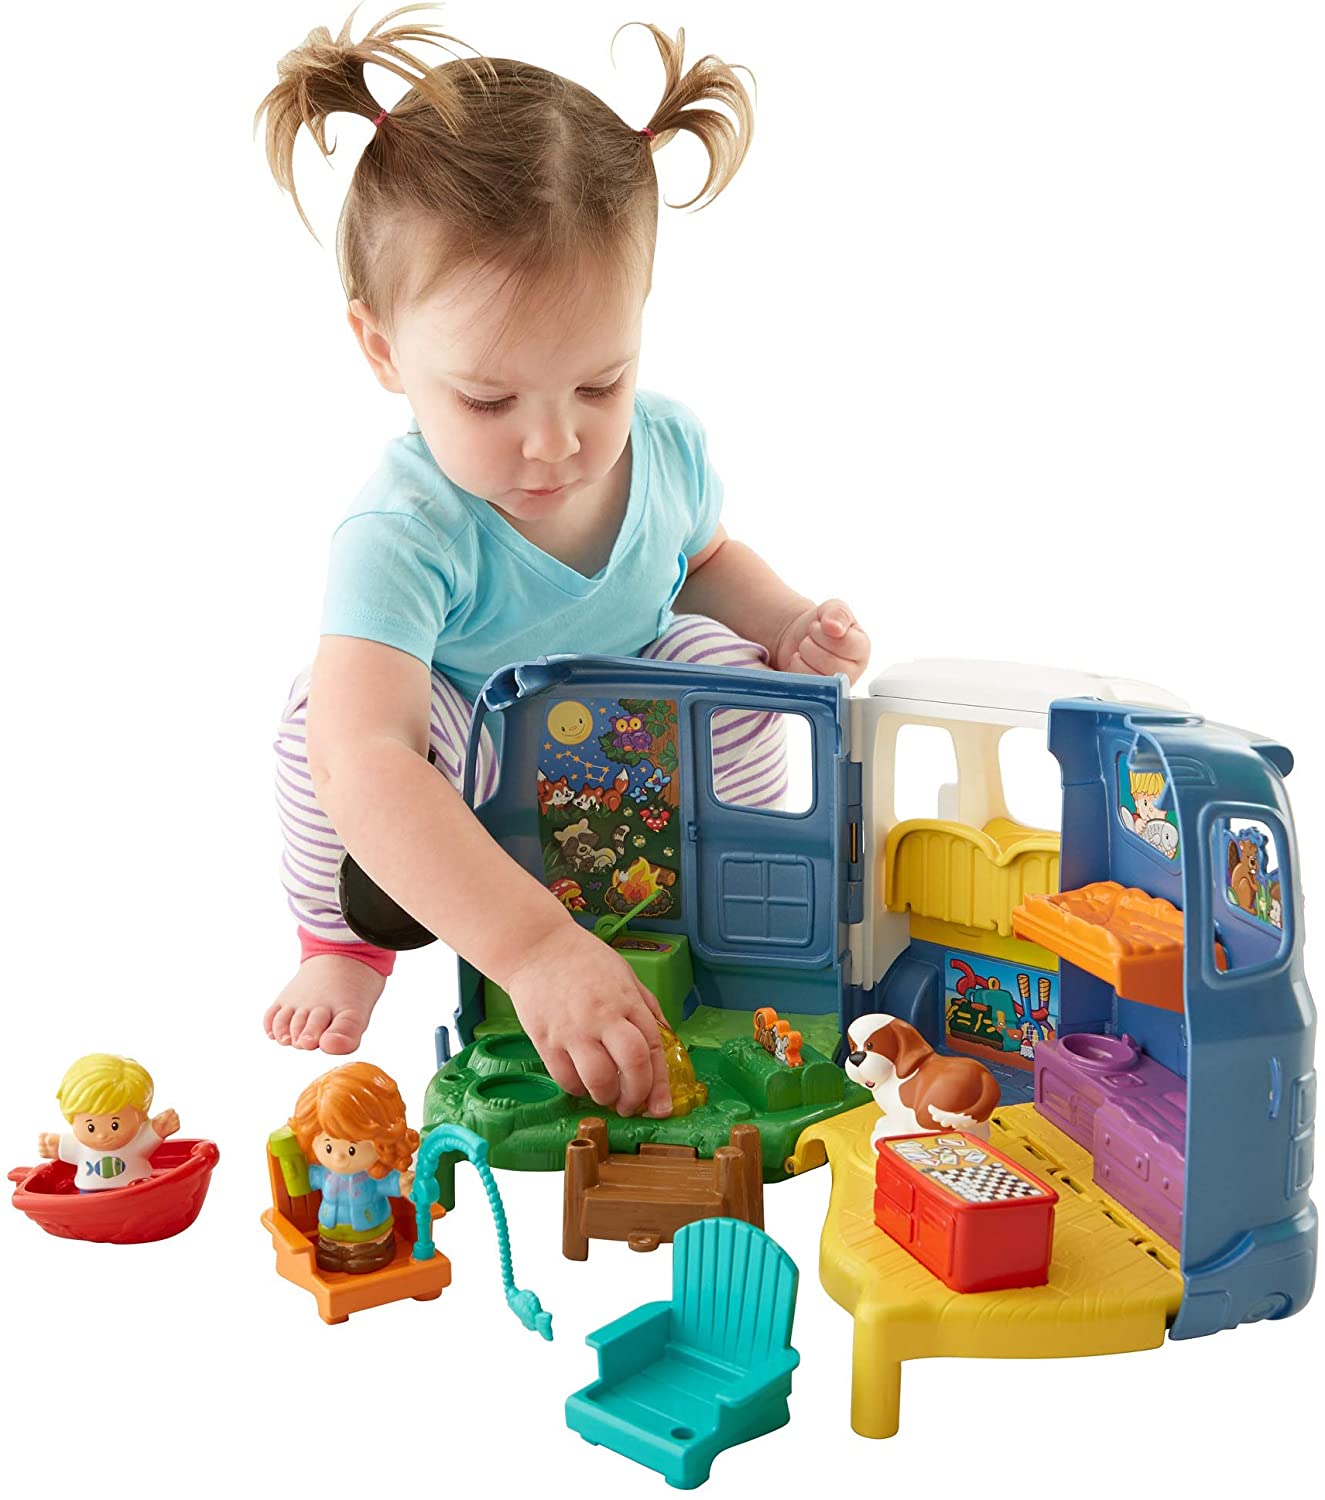 9 Best Fisher Price Little People Toys 2022 - Buying Guide 2